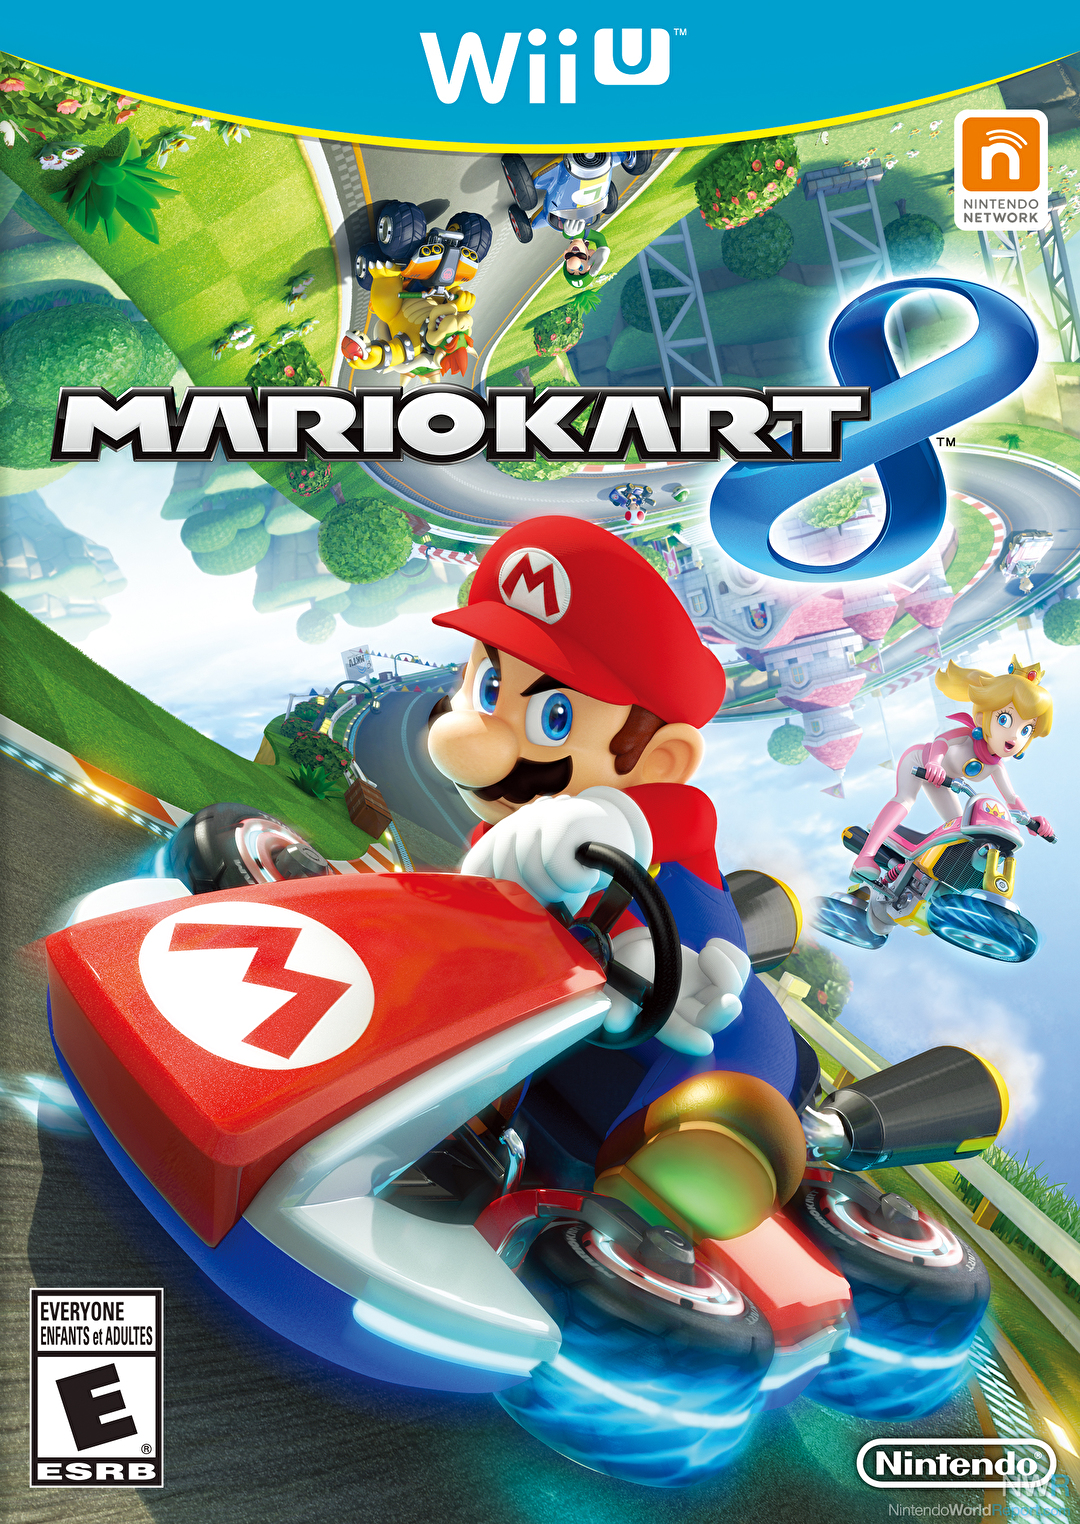 Mario Kart 8 Hands-on Preview - Hands-on Preview - Nintendo World Report